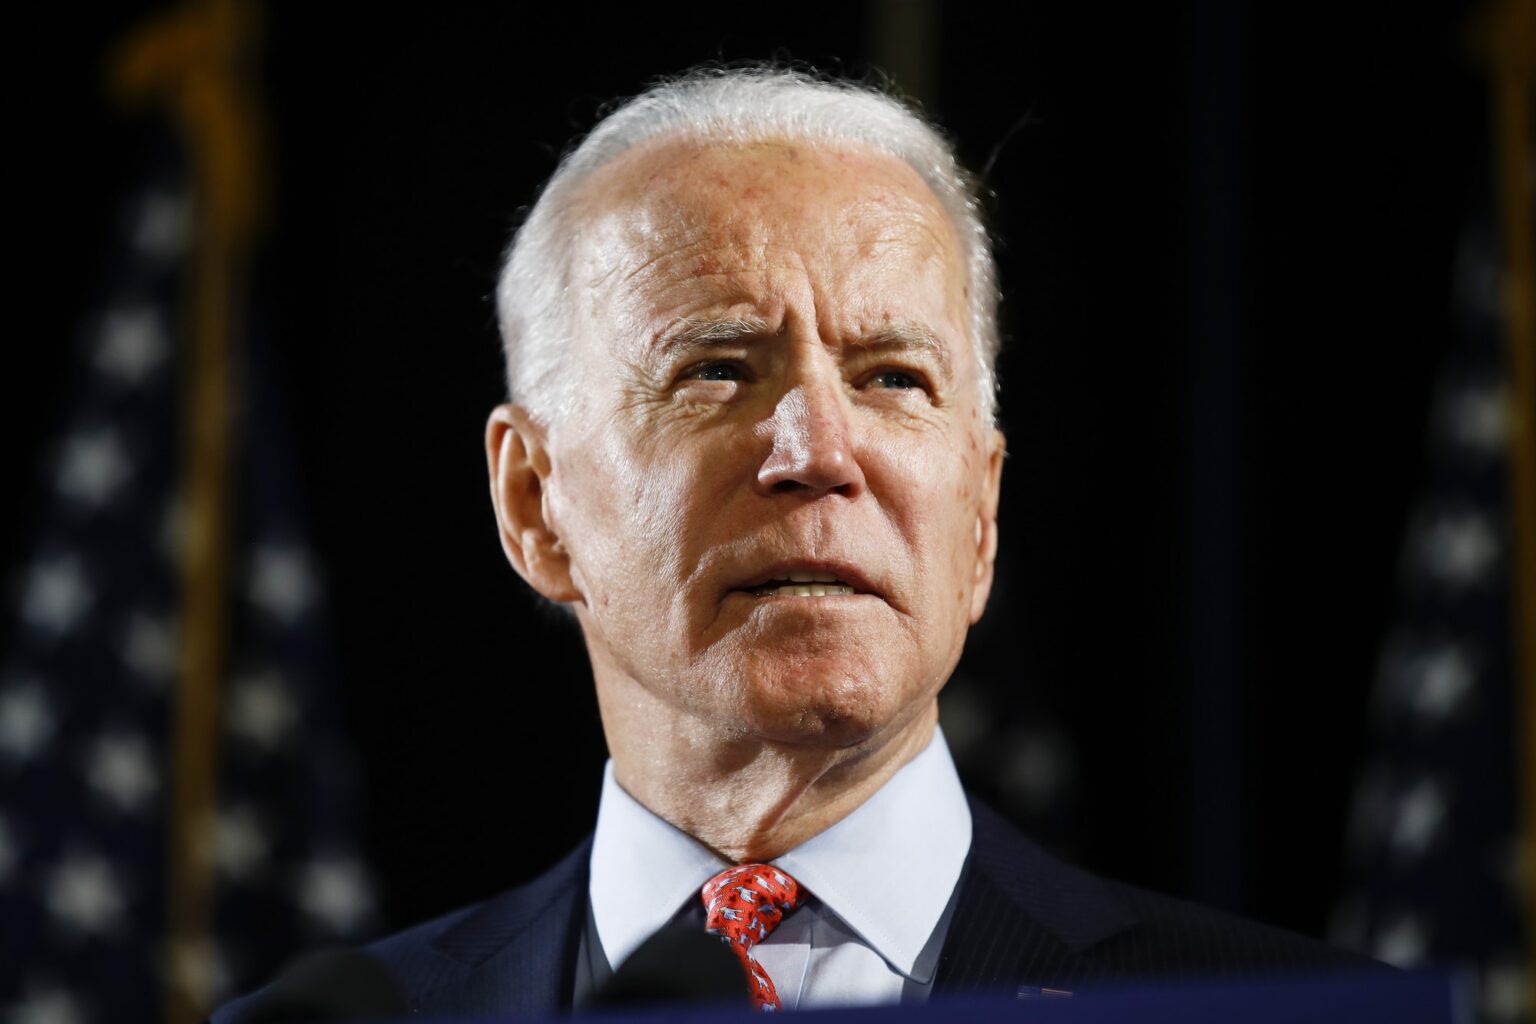 The coronavirus is still raging across the USA, leading to hundreds of thousands of deaths. What will this situation look like with Joe Biden as president?